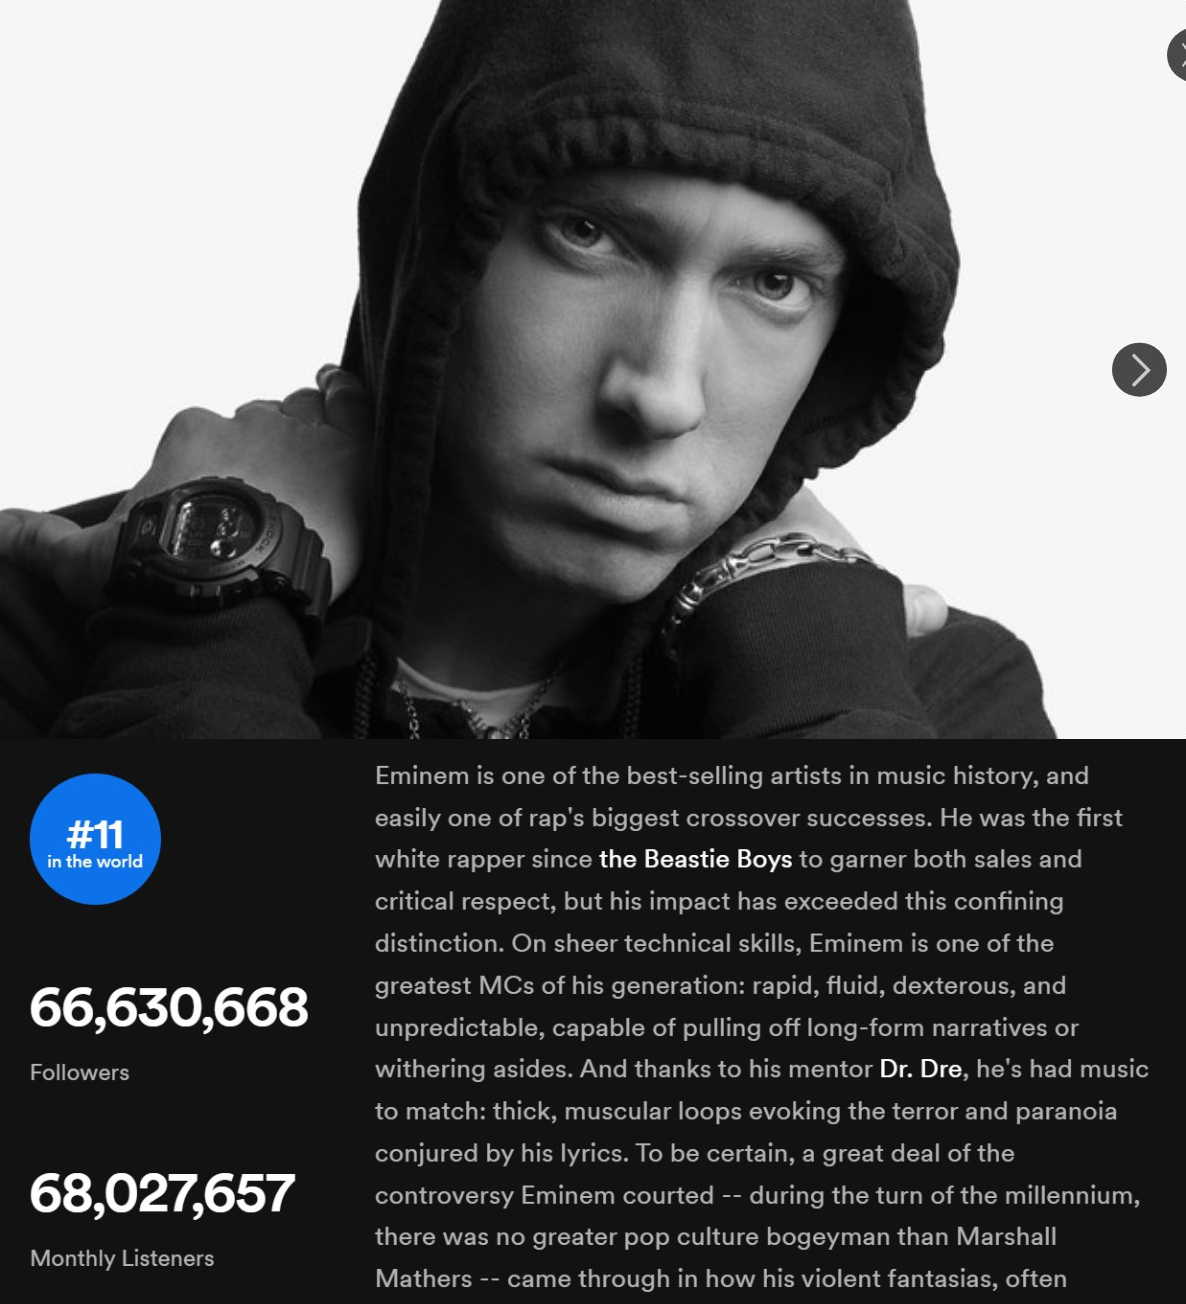 Eminem Hits New Monthly Listeners Peak on Spotify and Surpasses Justin